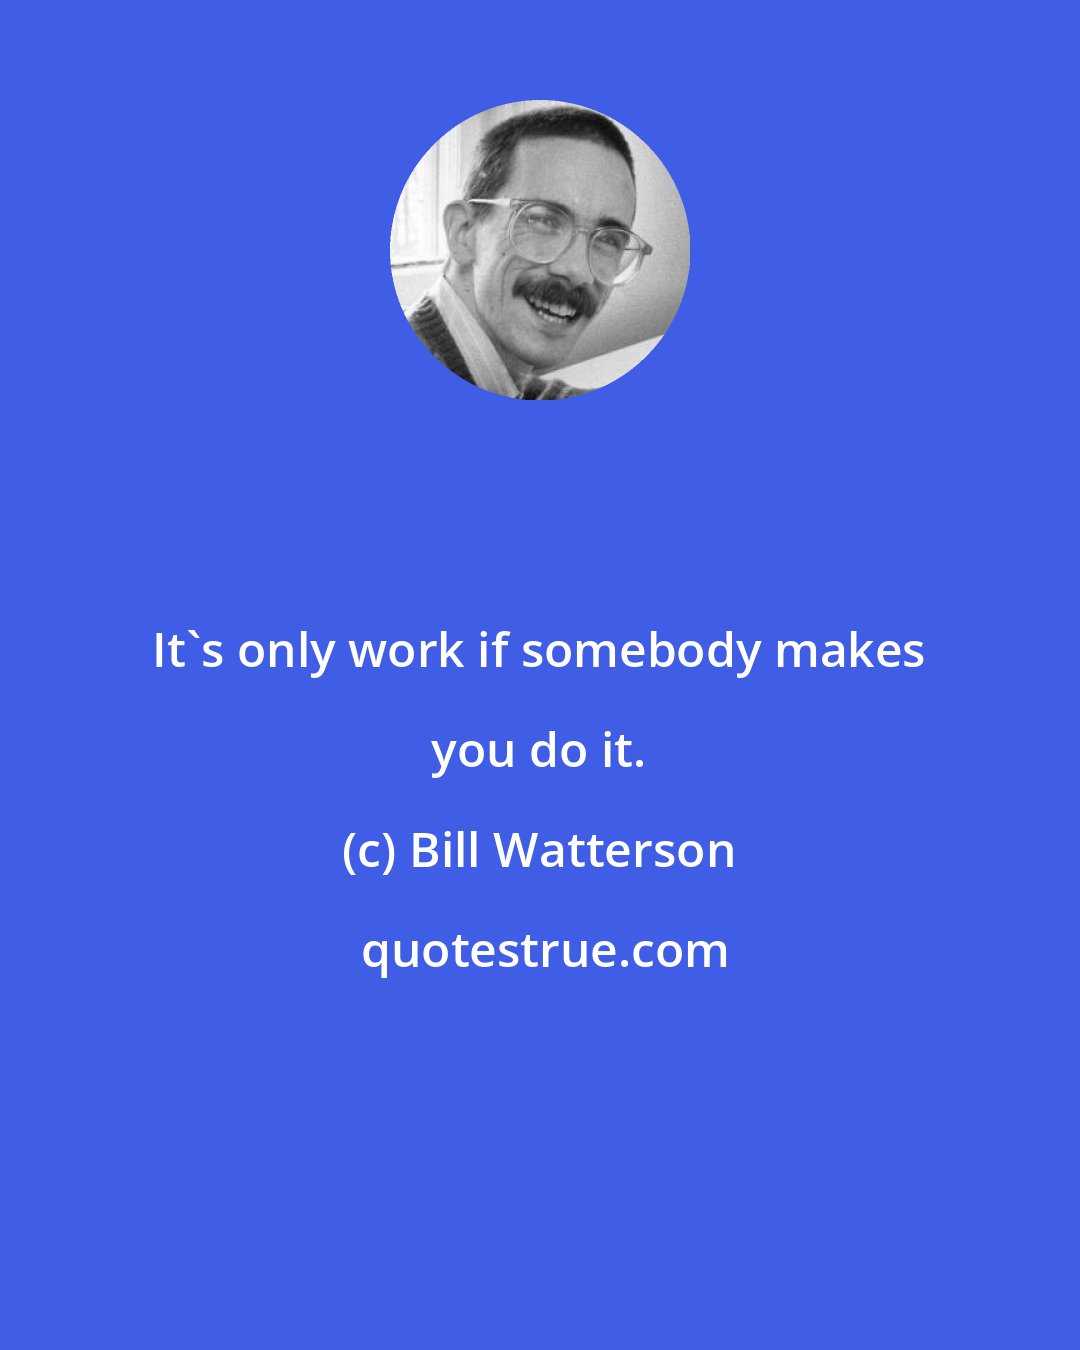 Bill Watterson: It's only work if somebody makes you do it.